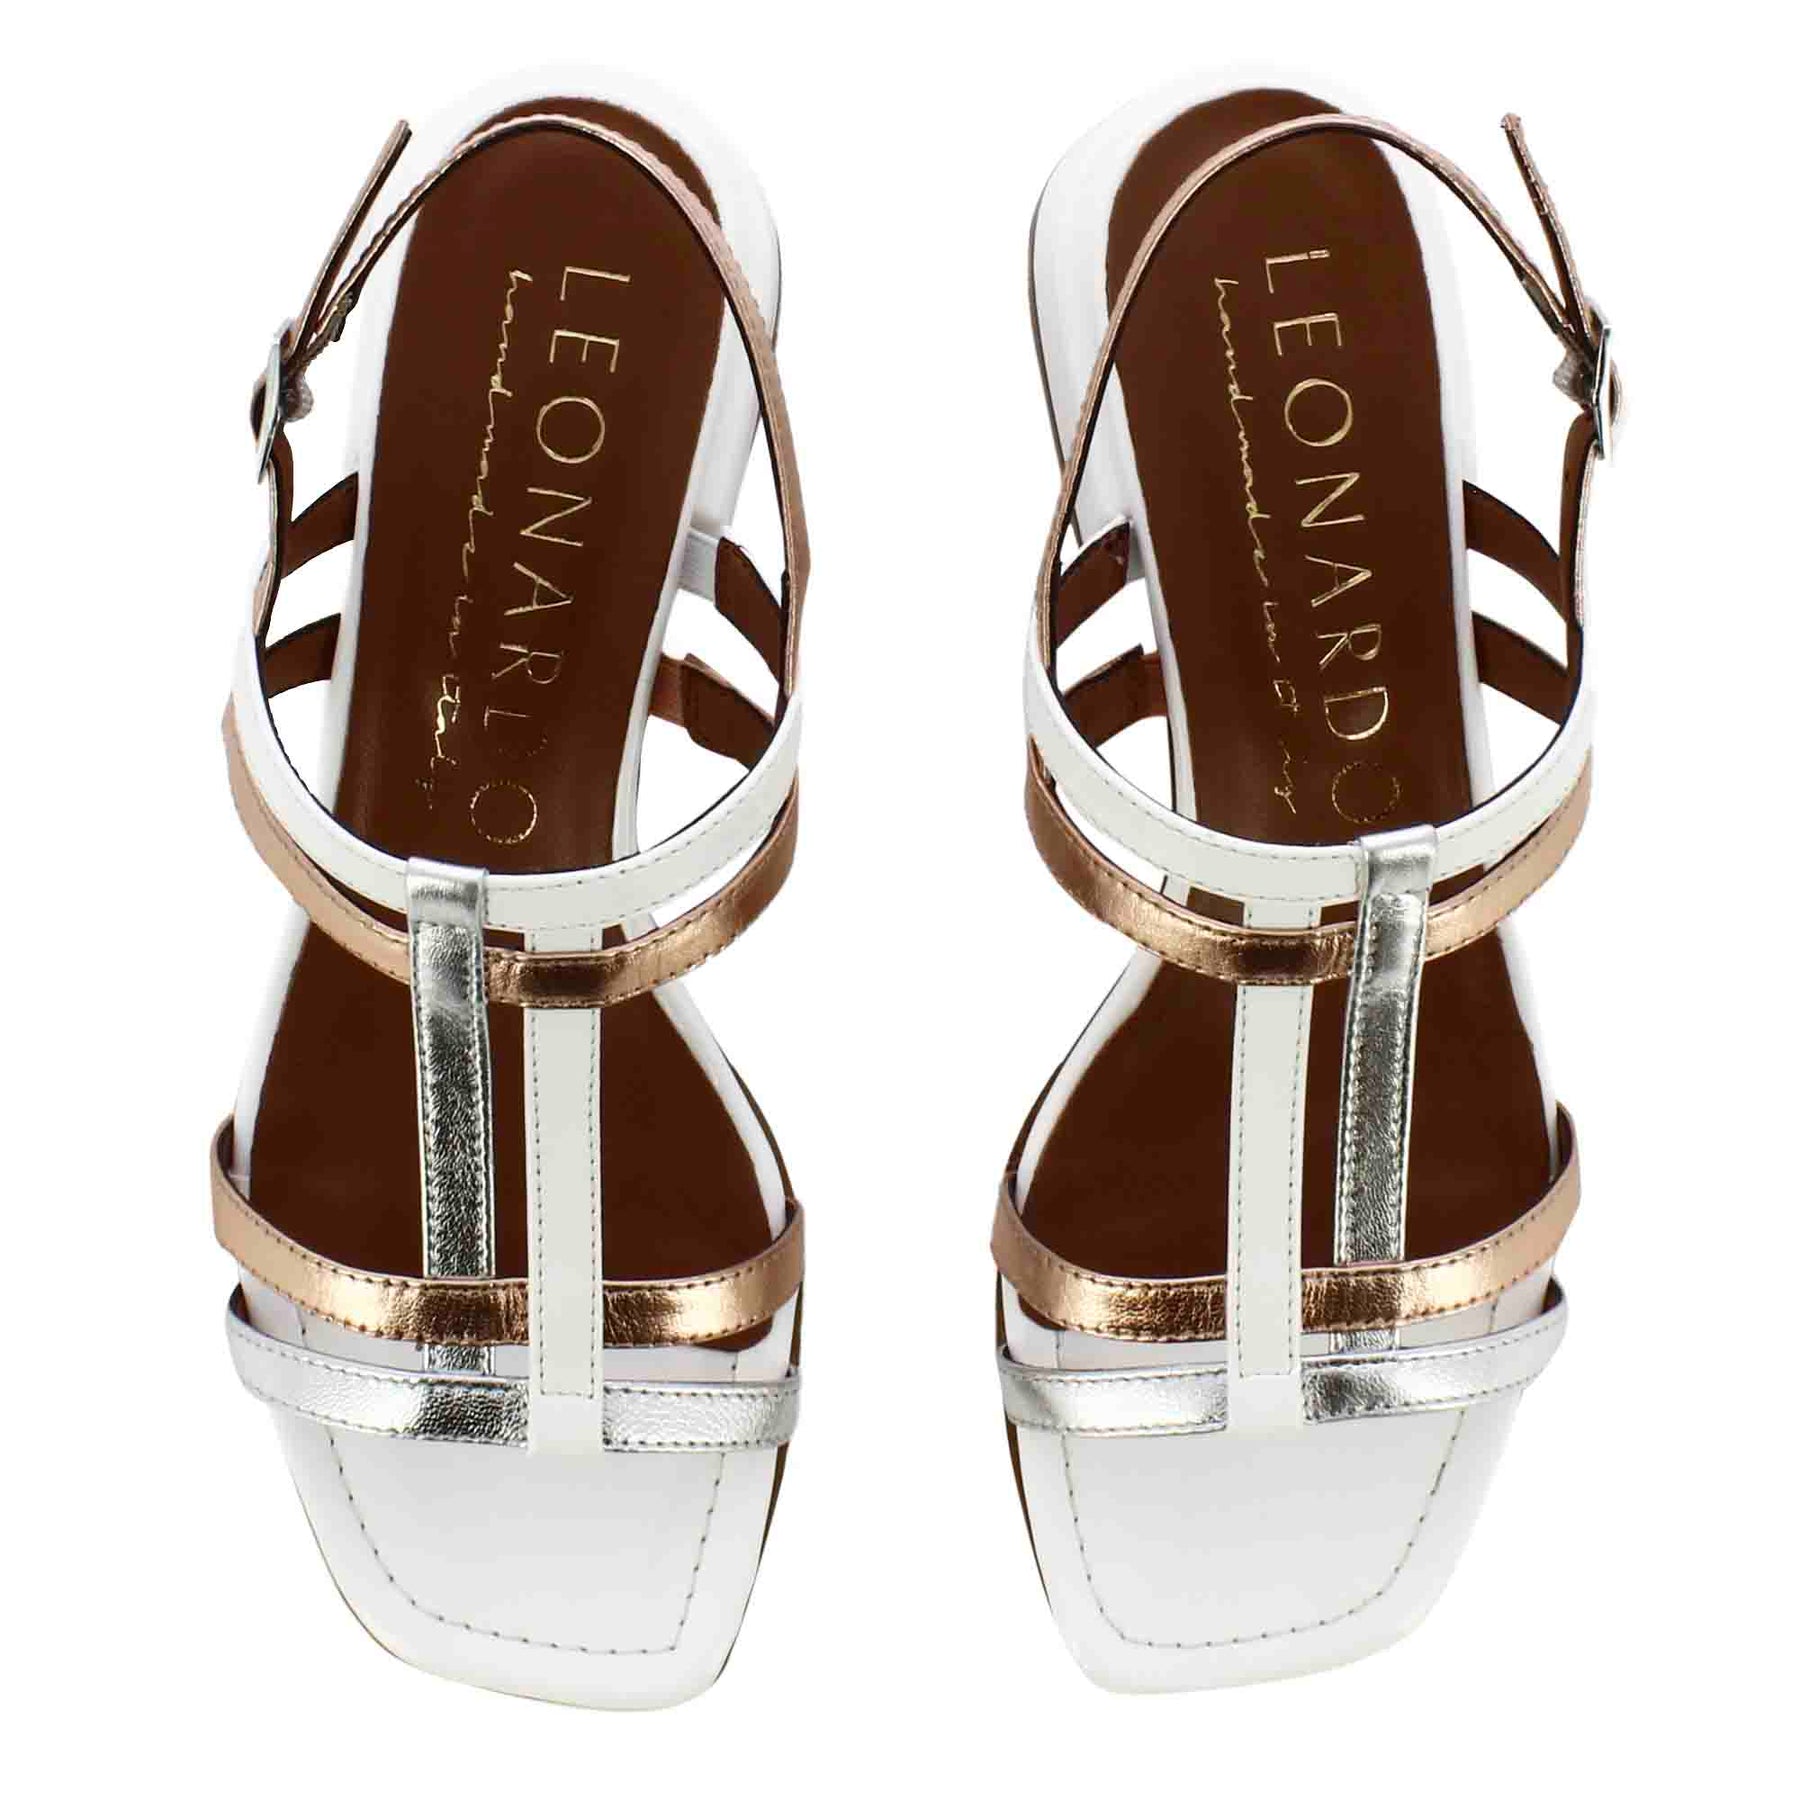 Women's sandal with white and silver patent leather bands